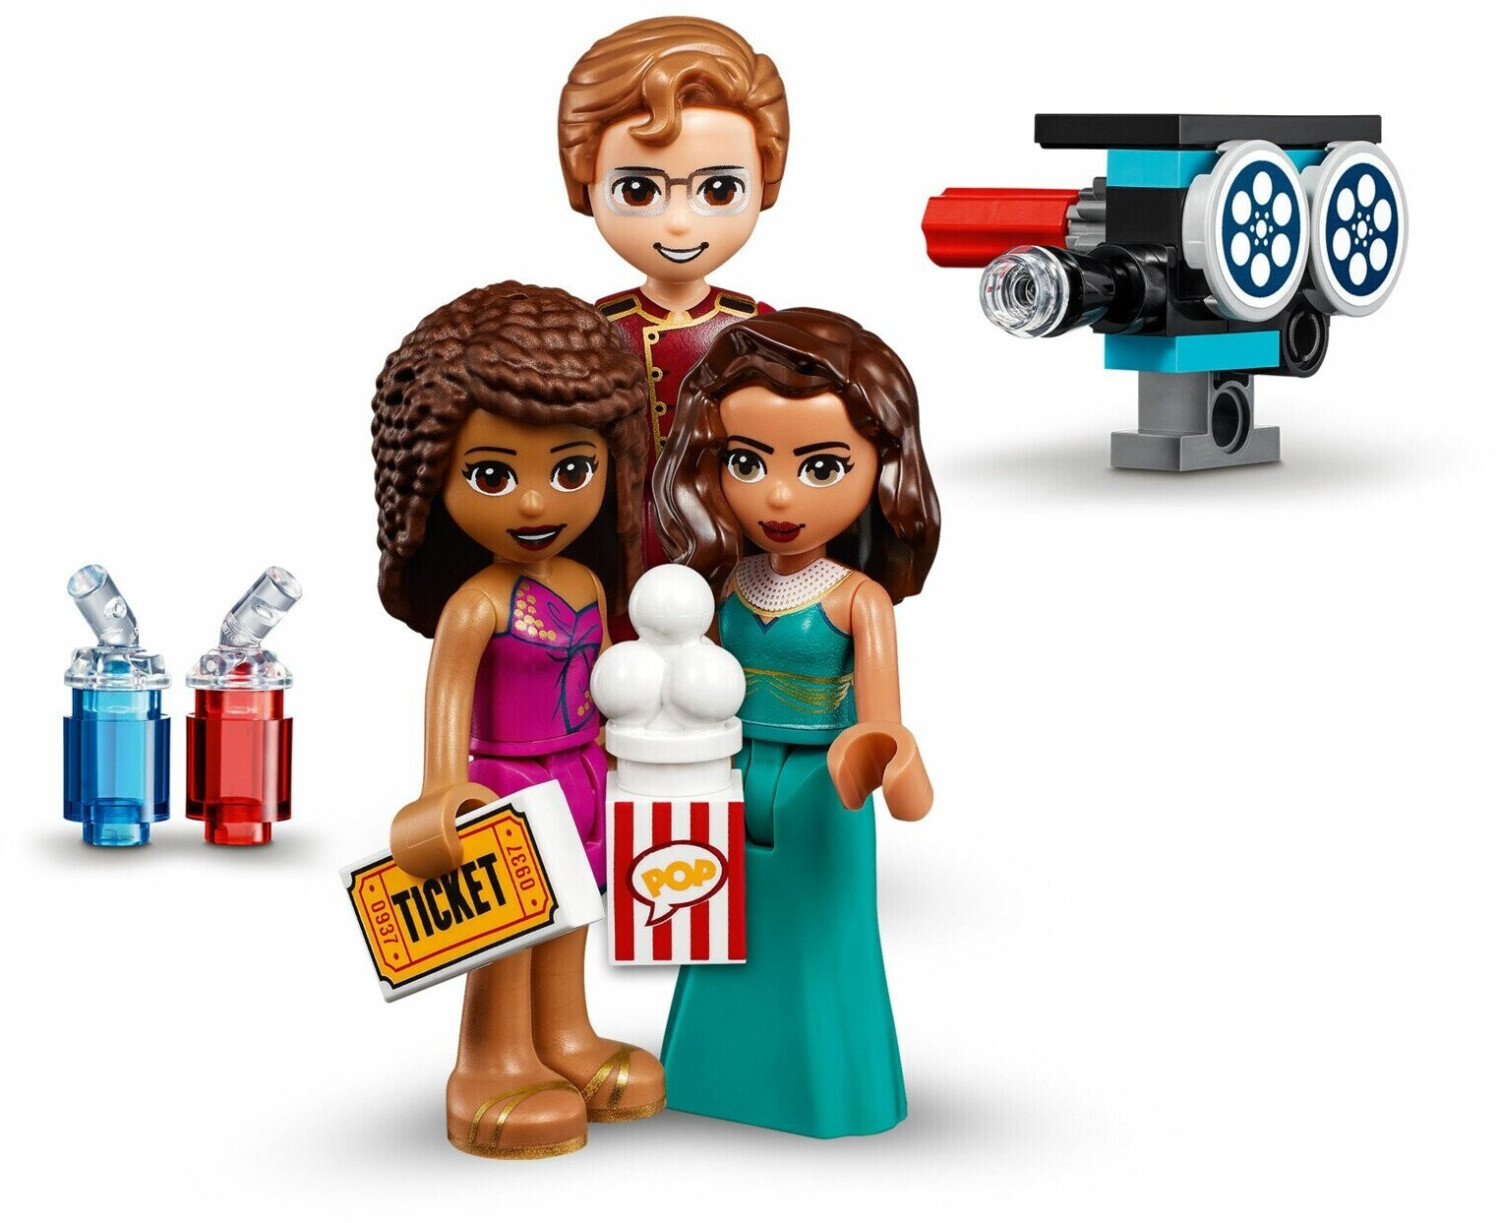 Buy LEGO Friends – Best City Cinema from Deals - £24.23 (41448) (Today) on Heartlake